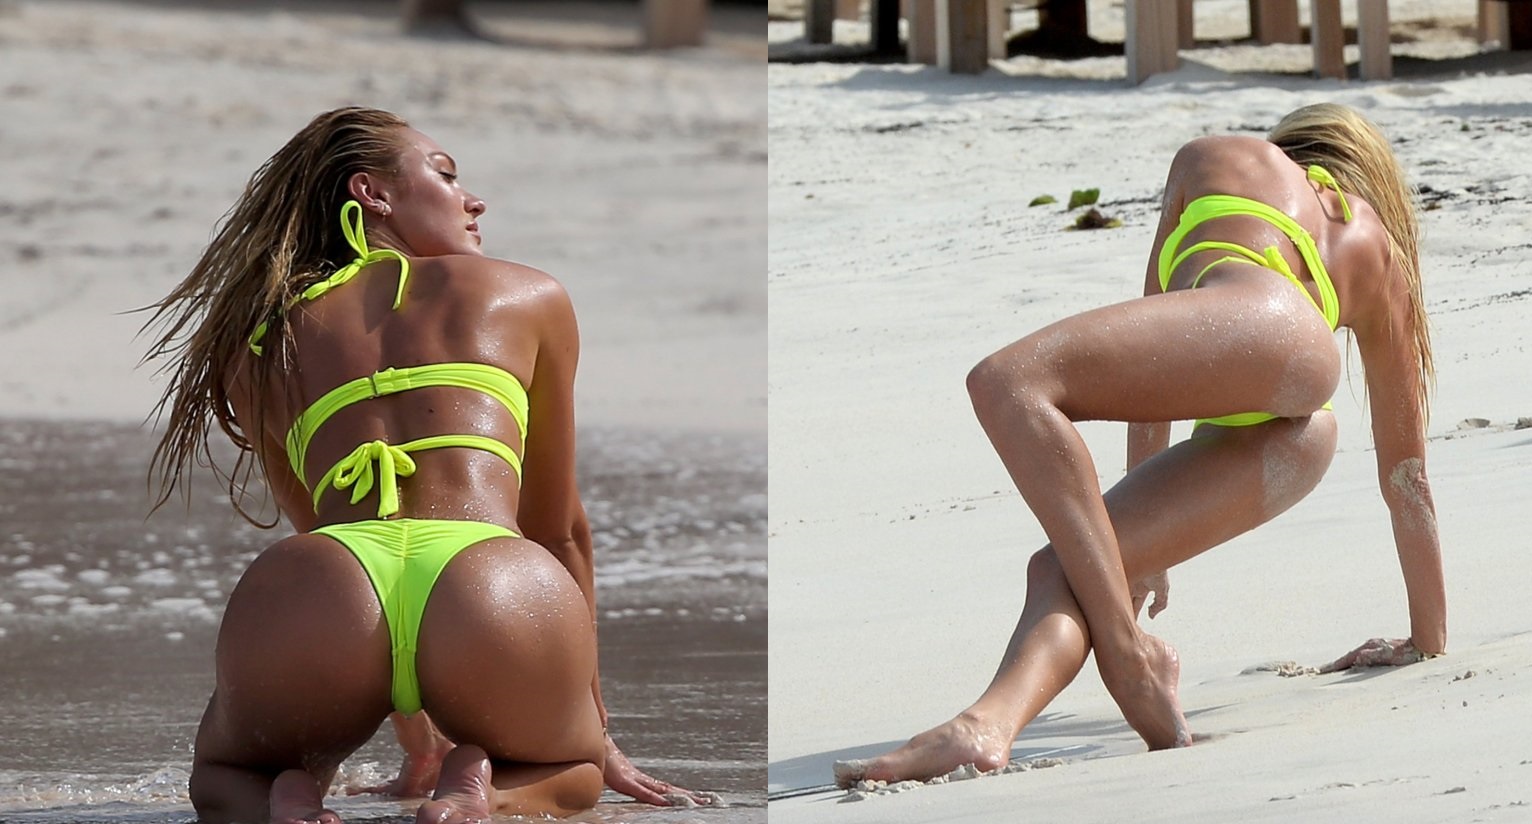 Candice swanepoel's butt